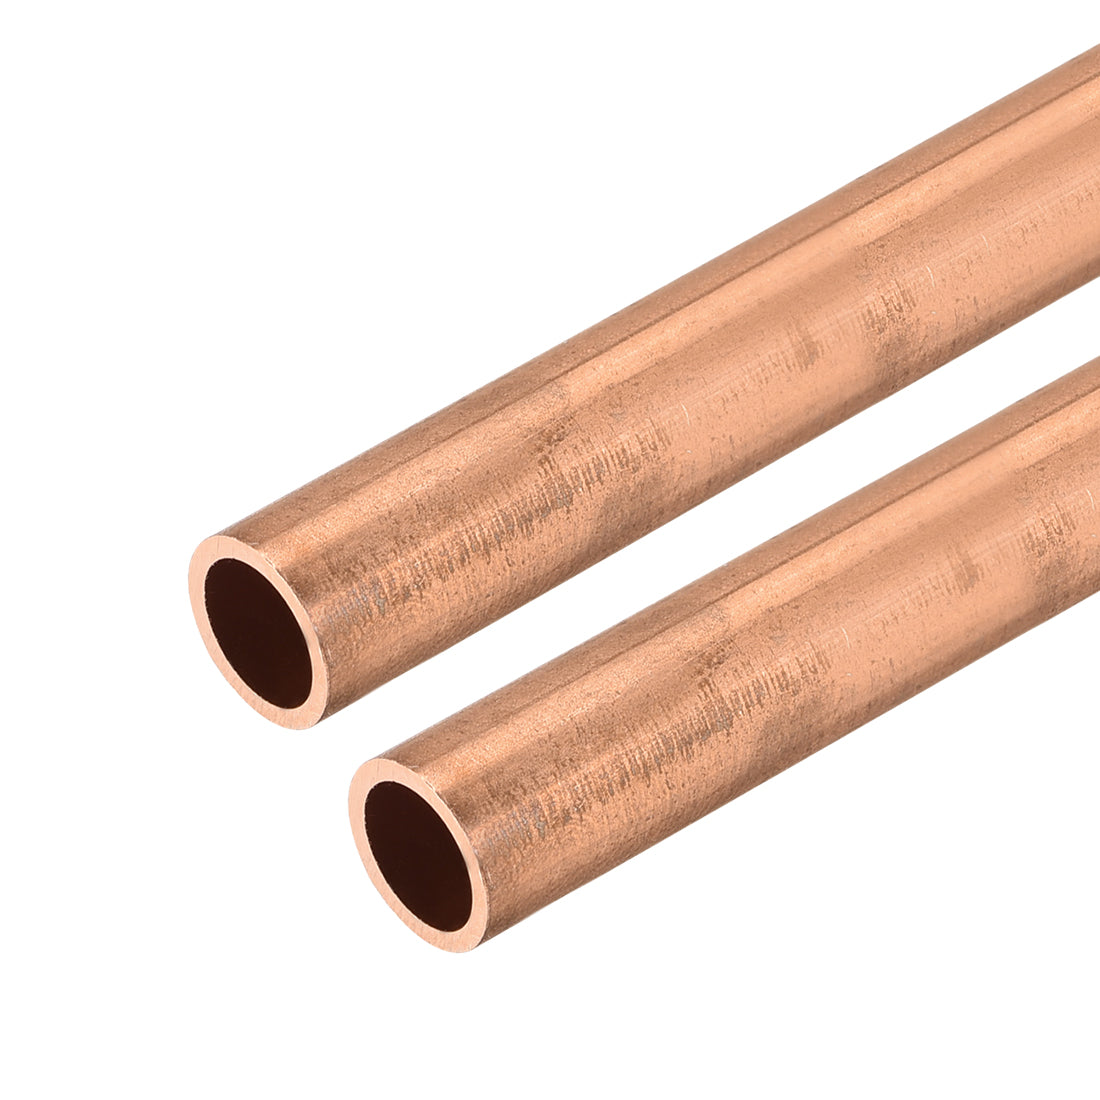 Uxcell Uxcell Copper Round Tube 10mm OD 1mm Wall Thickness 300mm Long Hollow Straight Pipe Tubing 2 Pcs